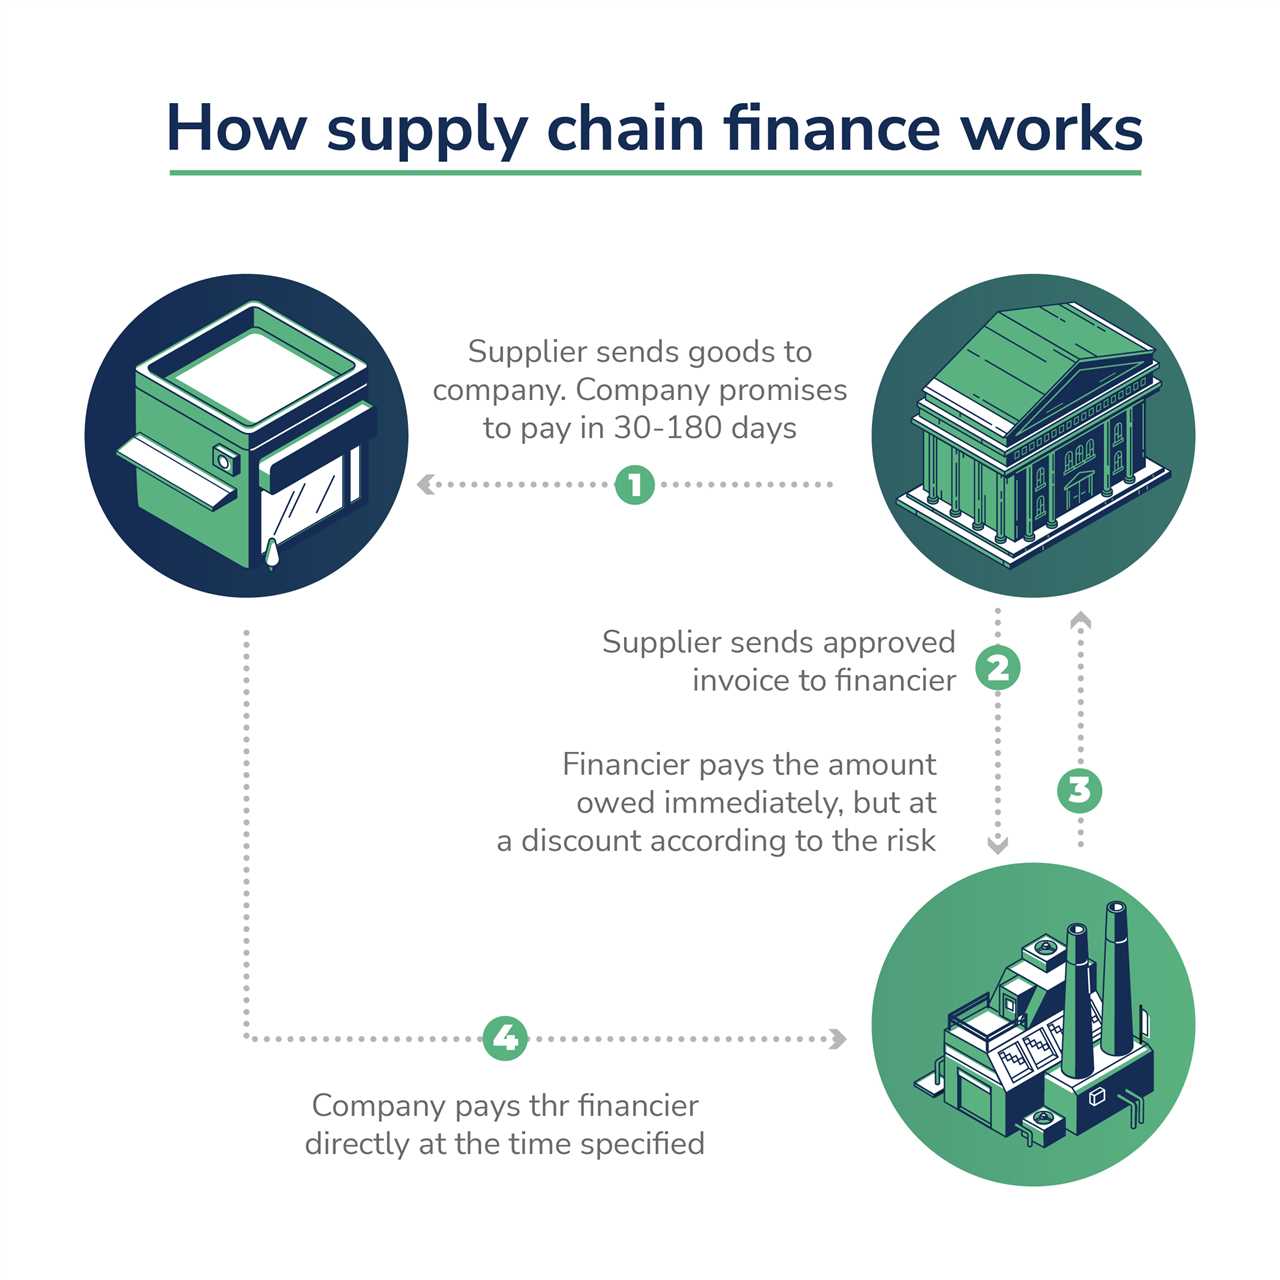 Supply Chain Finance and Risk Mitigation